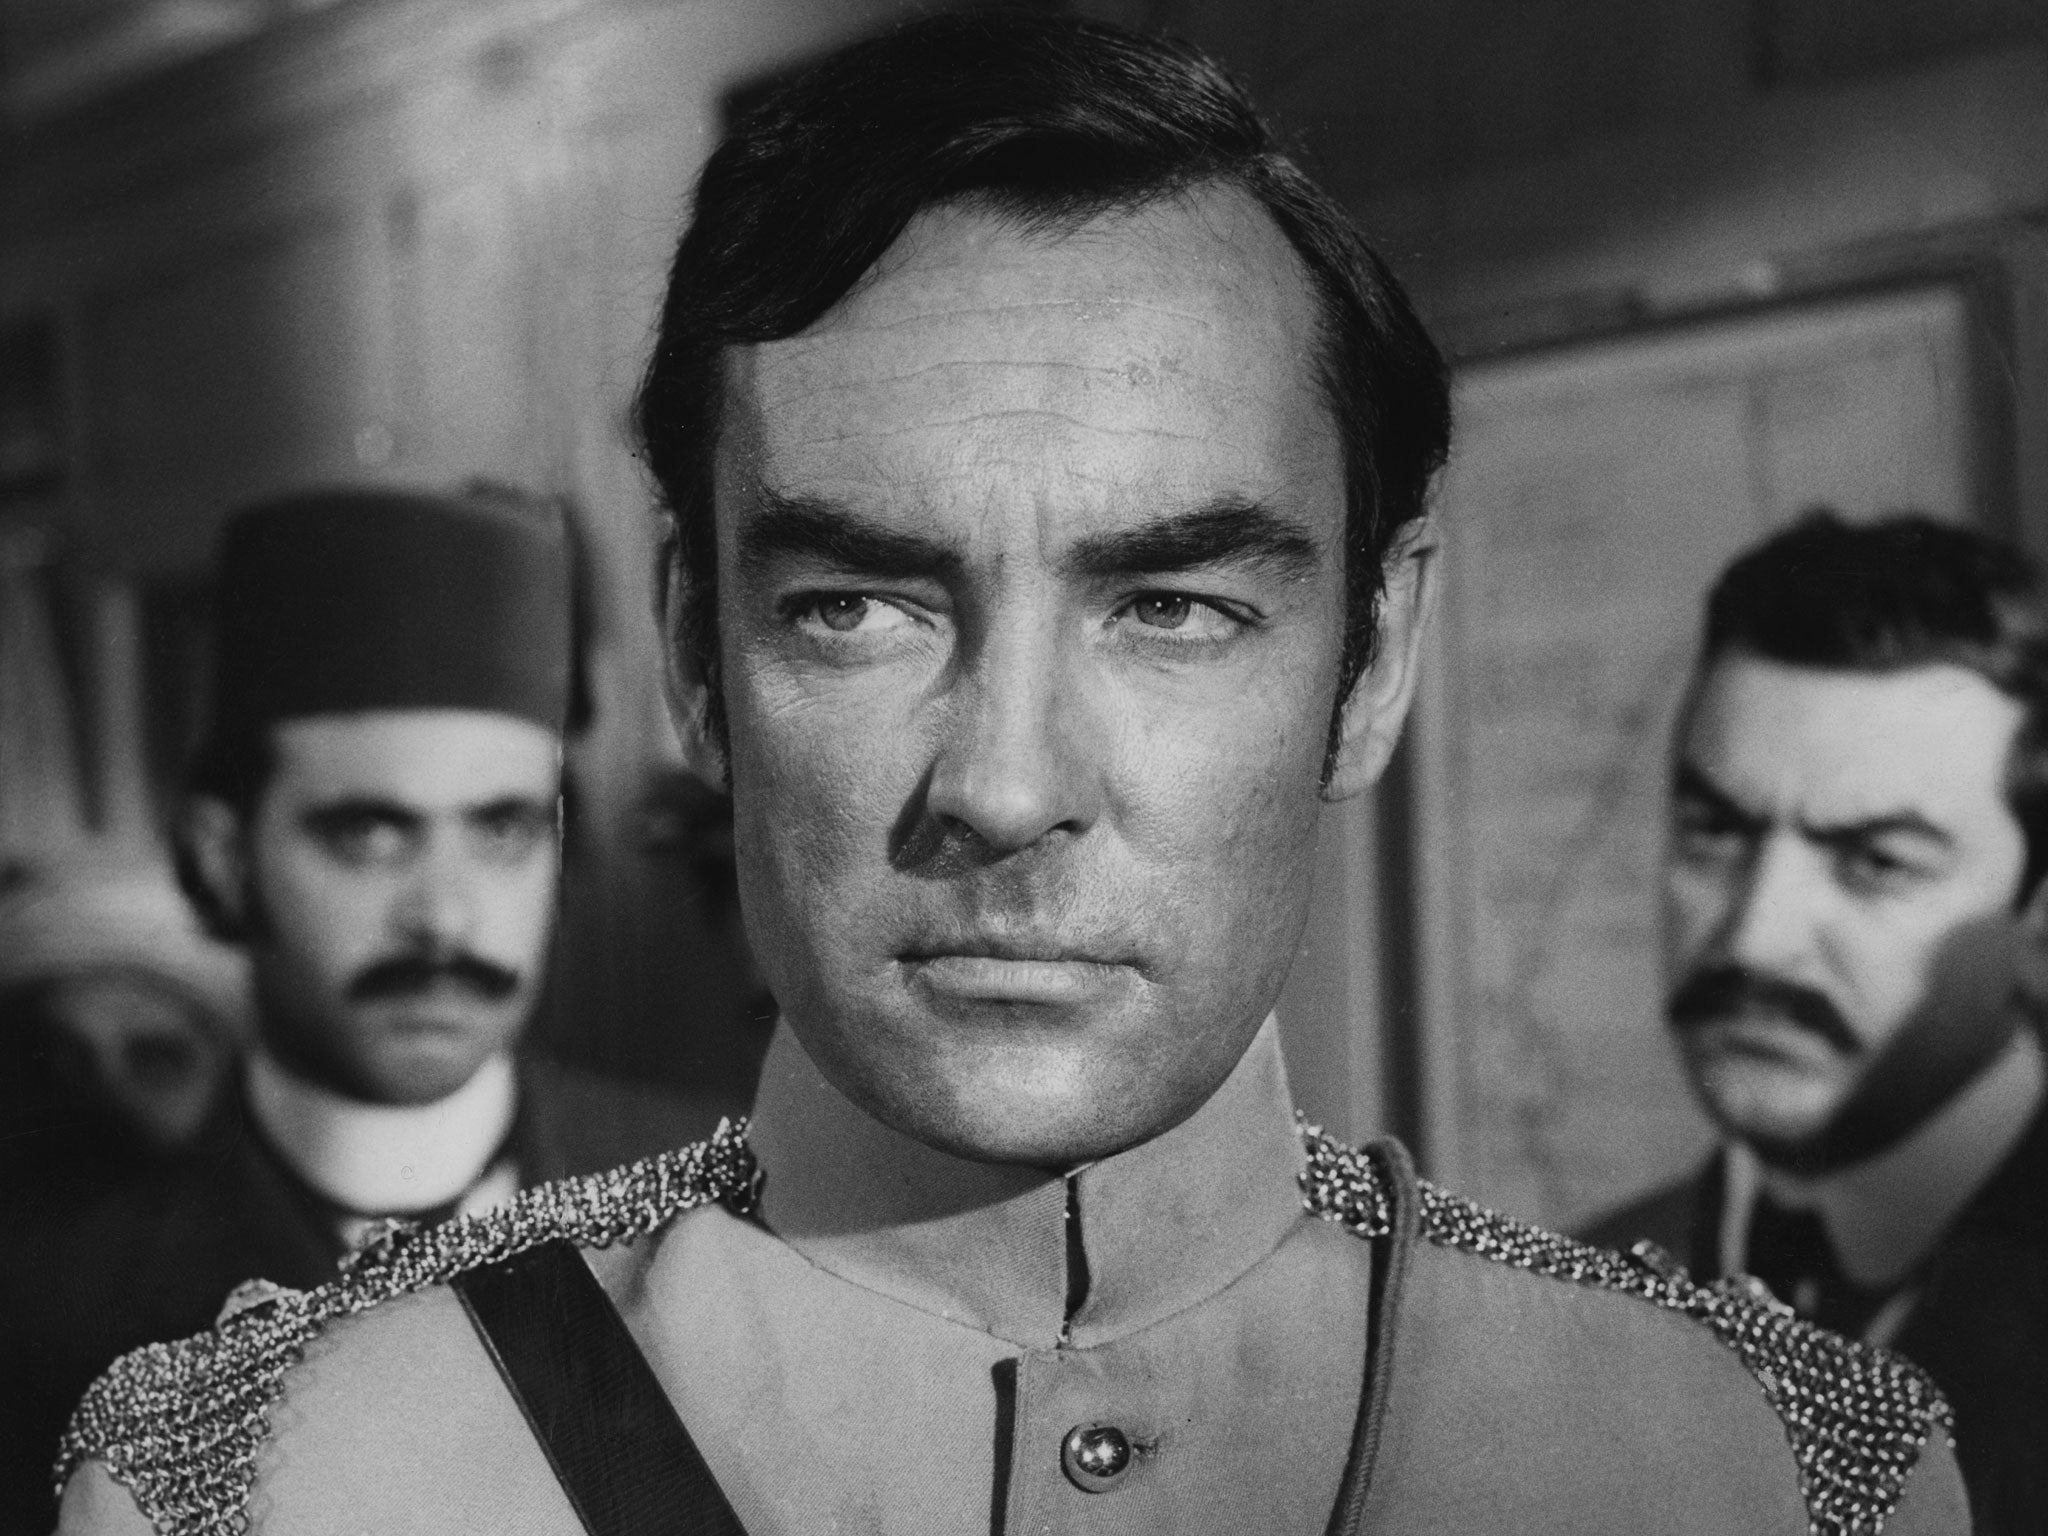 Richard Johnson, who starred in Khartoum and The Haunting, has died aged 87